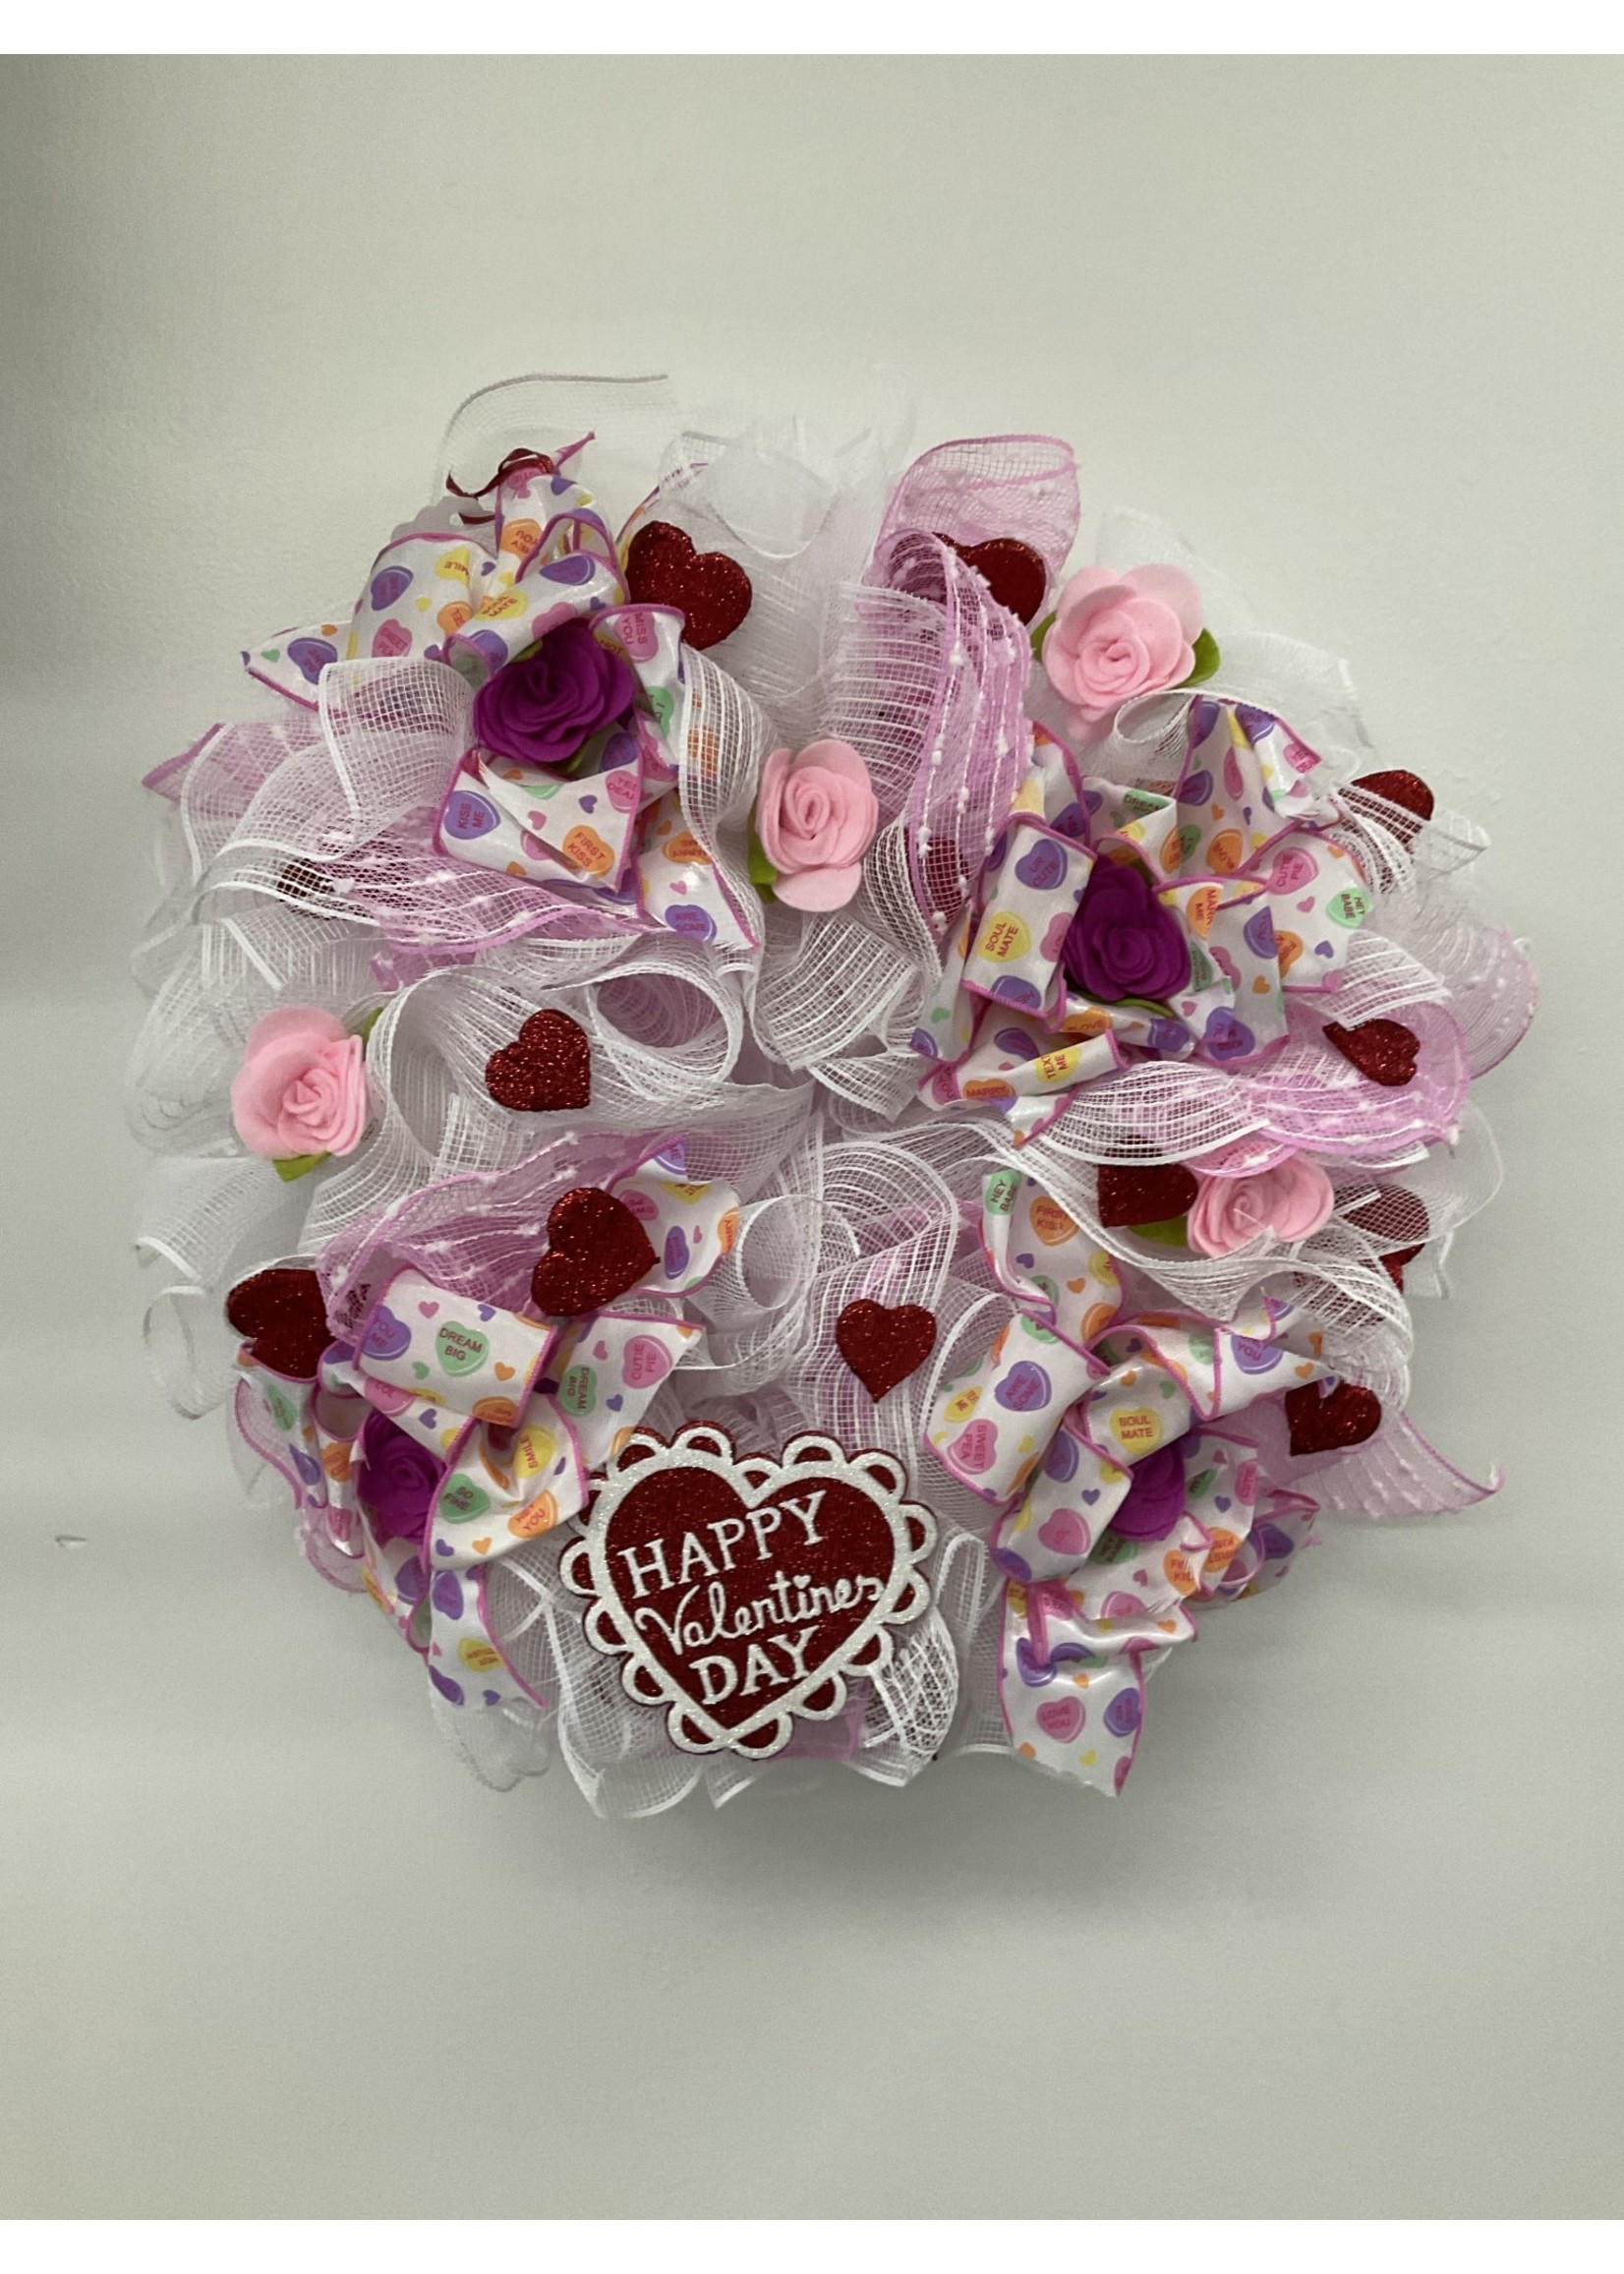 My New Favorite Thing Wreath Mesh White and Pink "Happy Valentines Day" with Hearts, Roses and Candy Ribbon